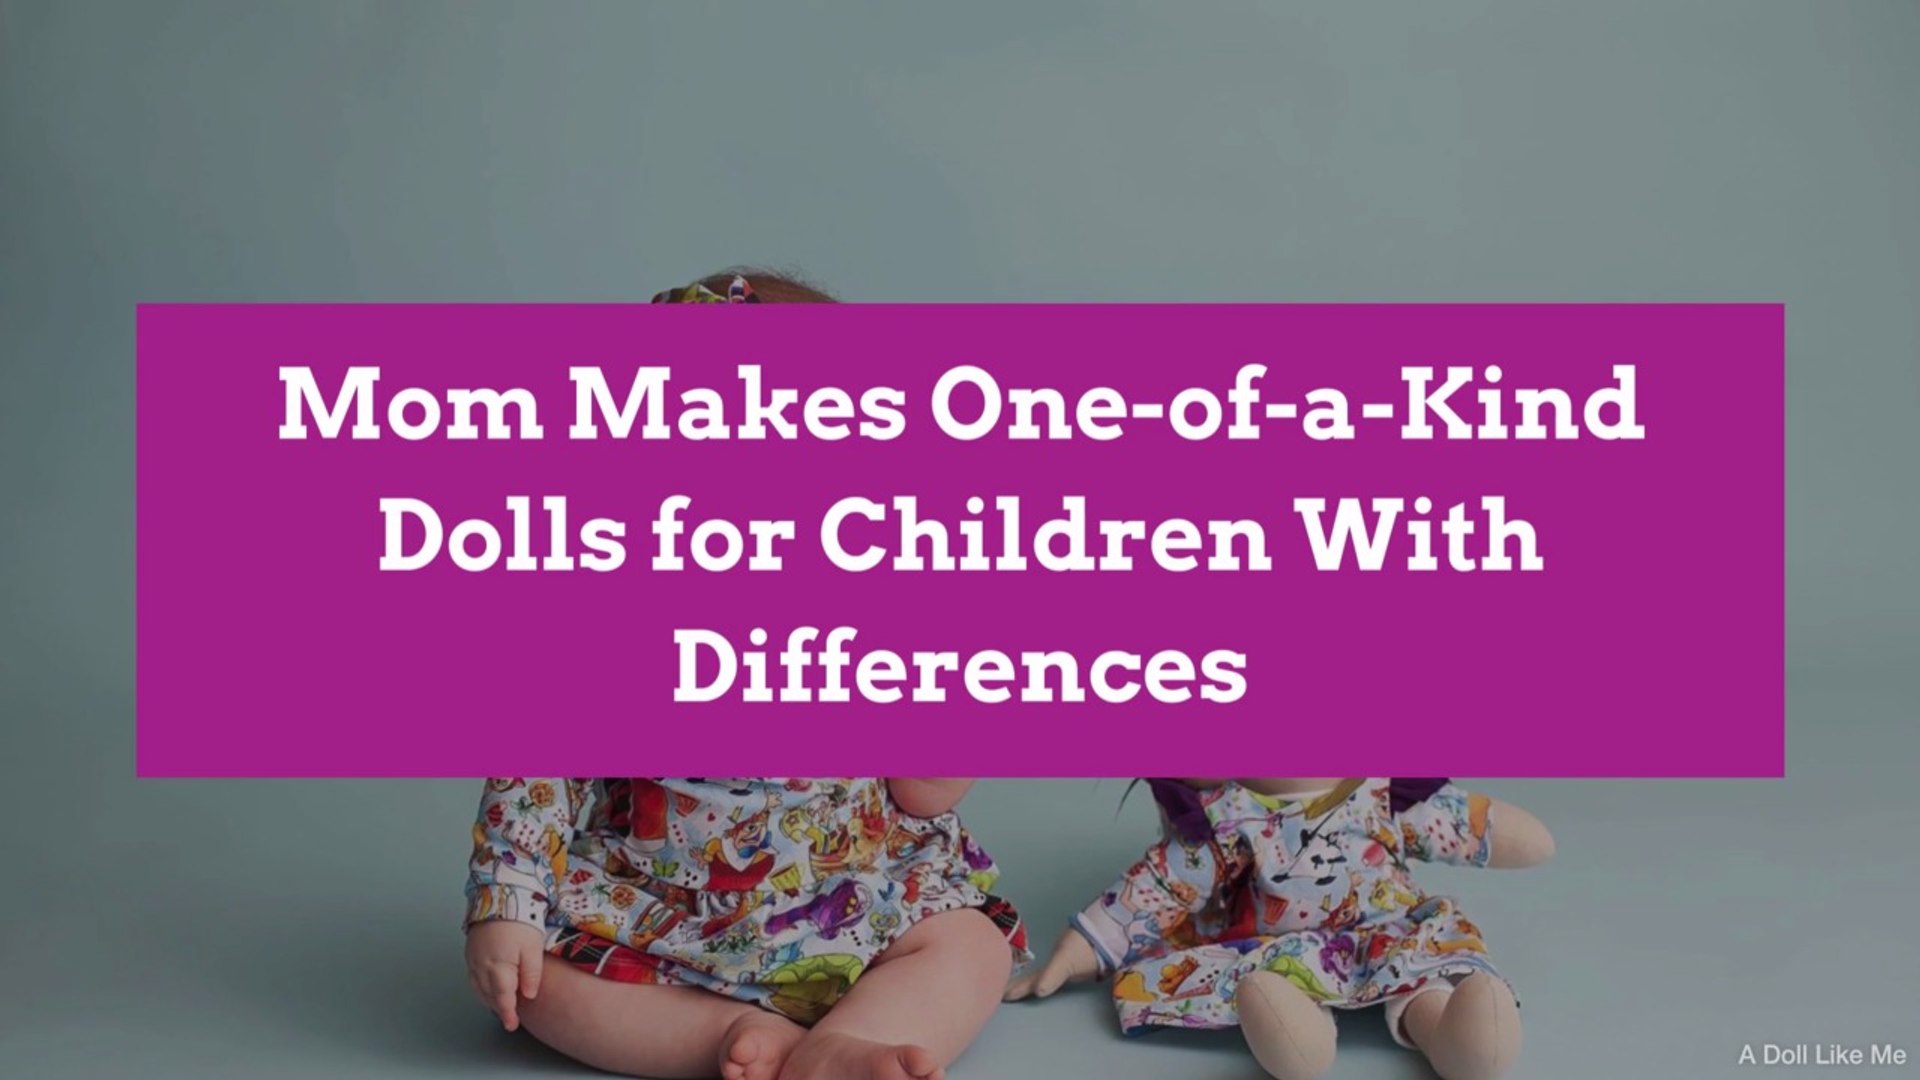 Mom Makes One-of-a-Kind Dolls for Children With Differences